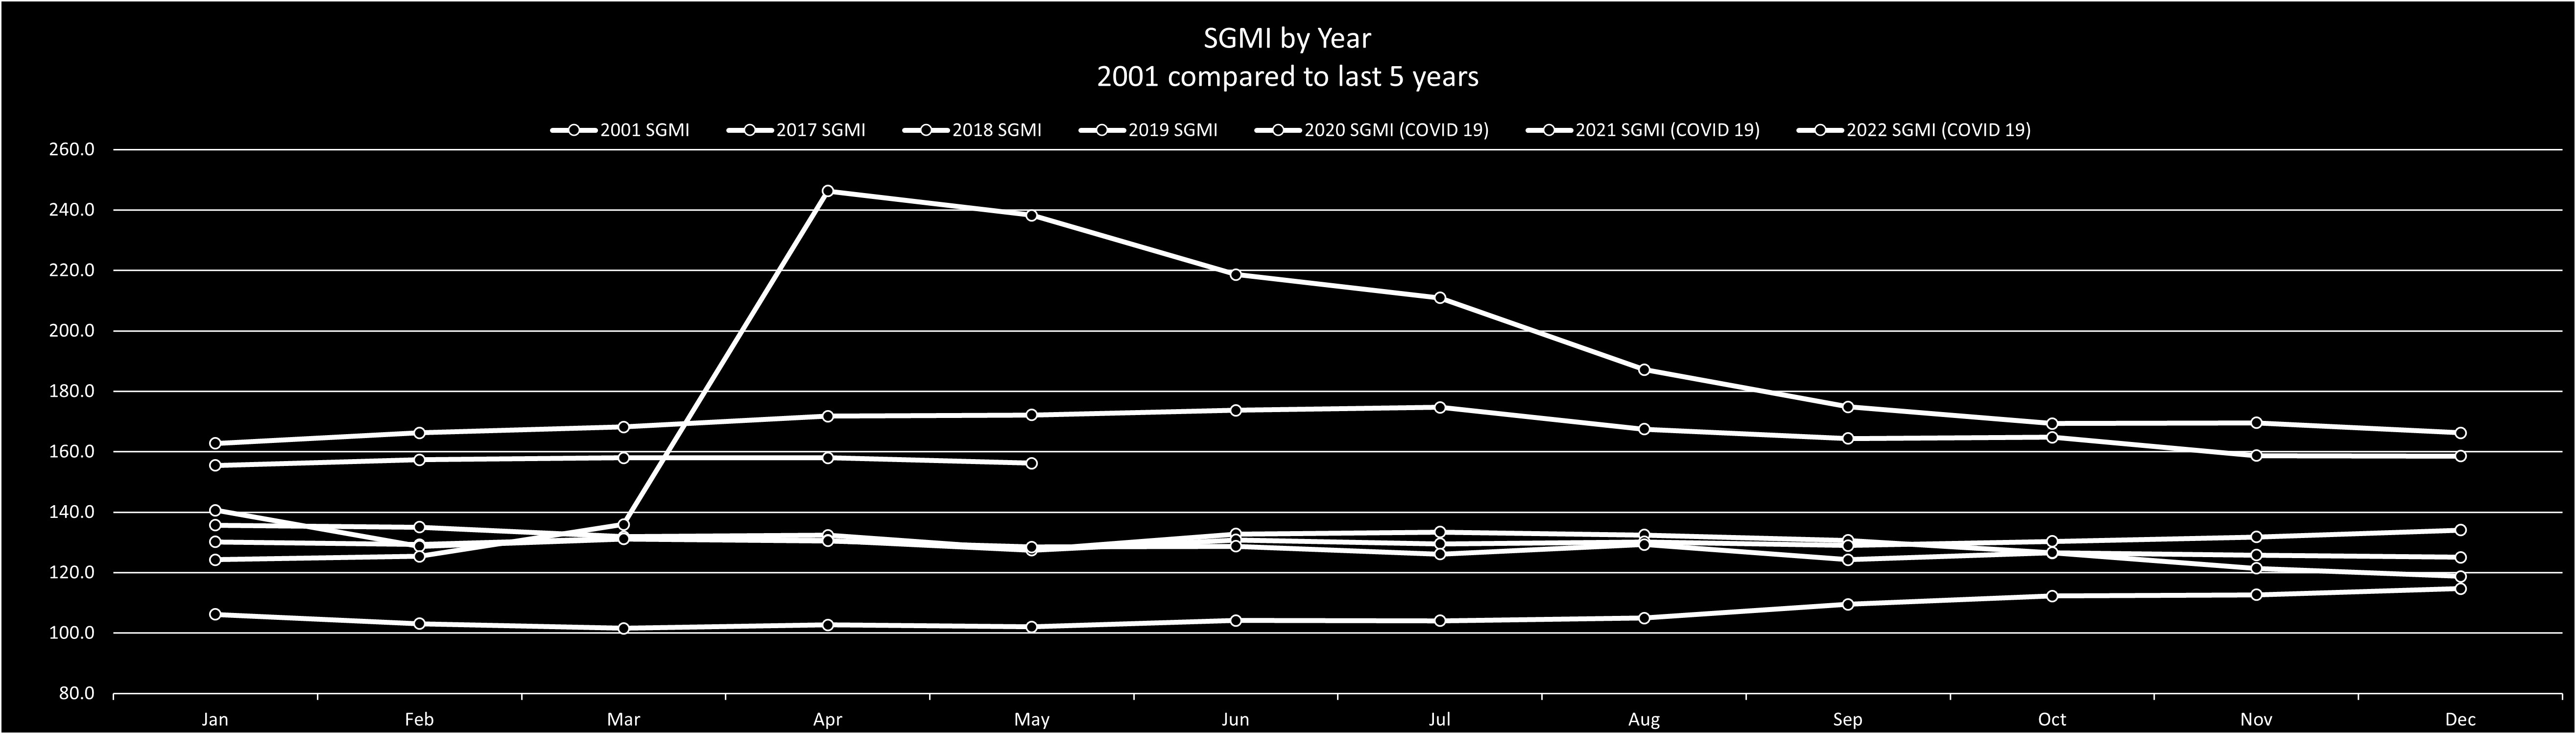 July 2022 SGMI 5-Year Graph